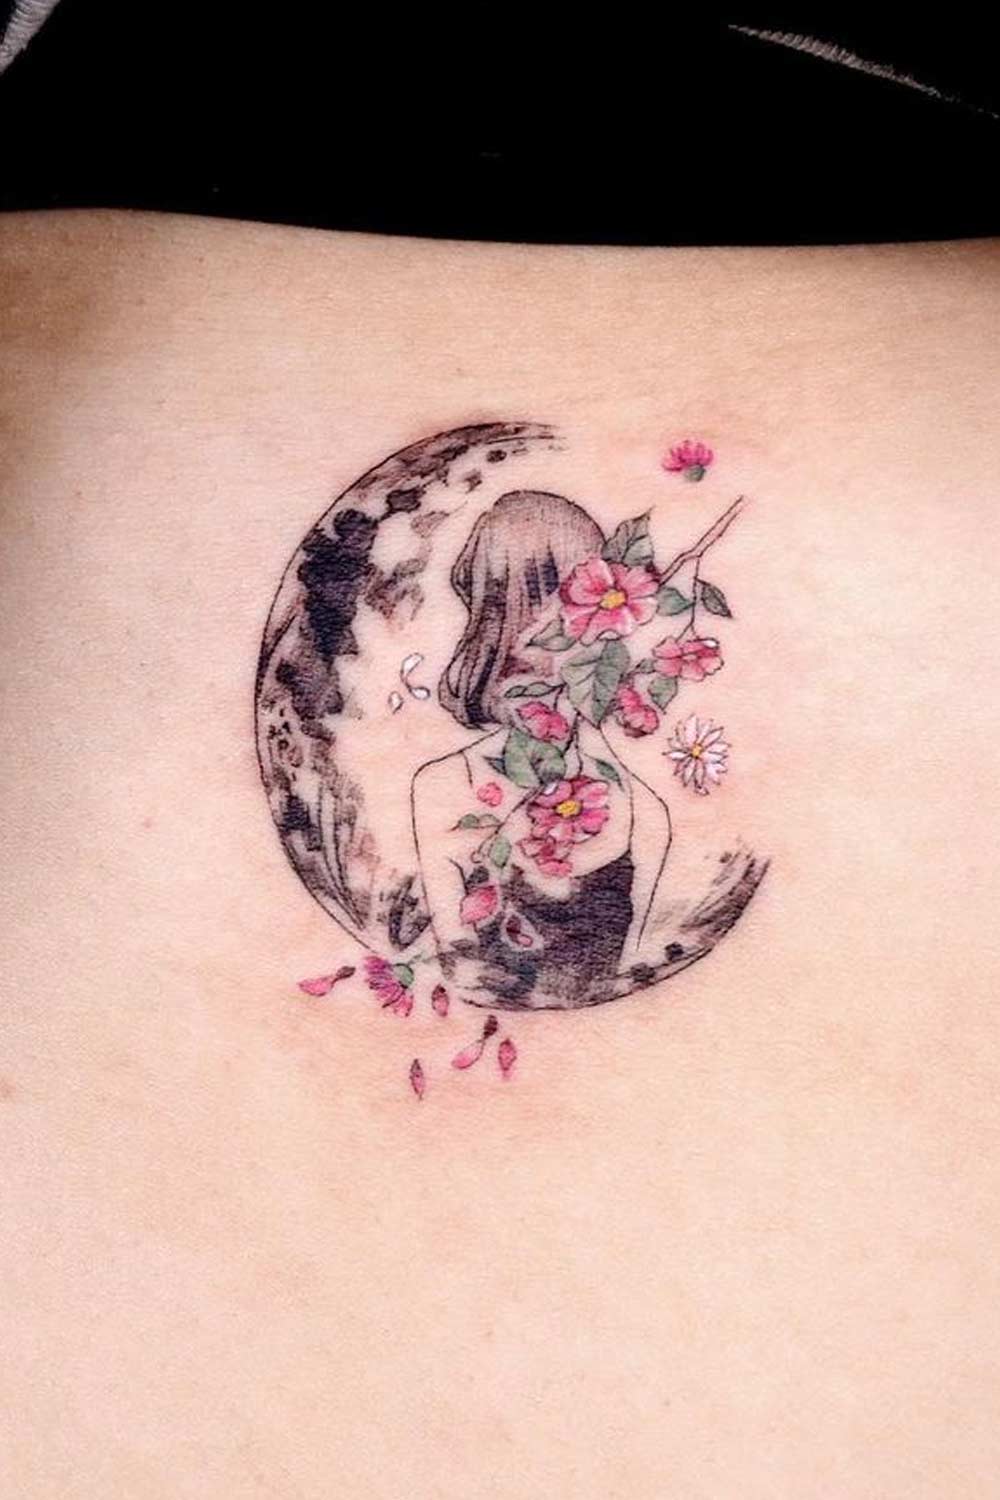 Meaning of Moon Tattoo